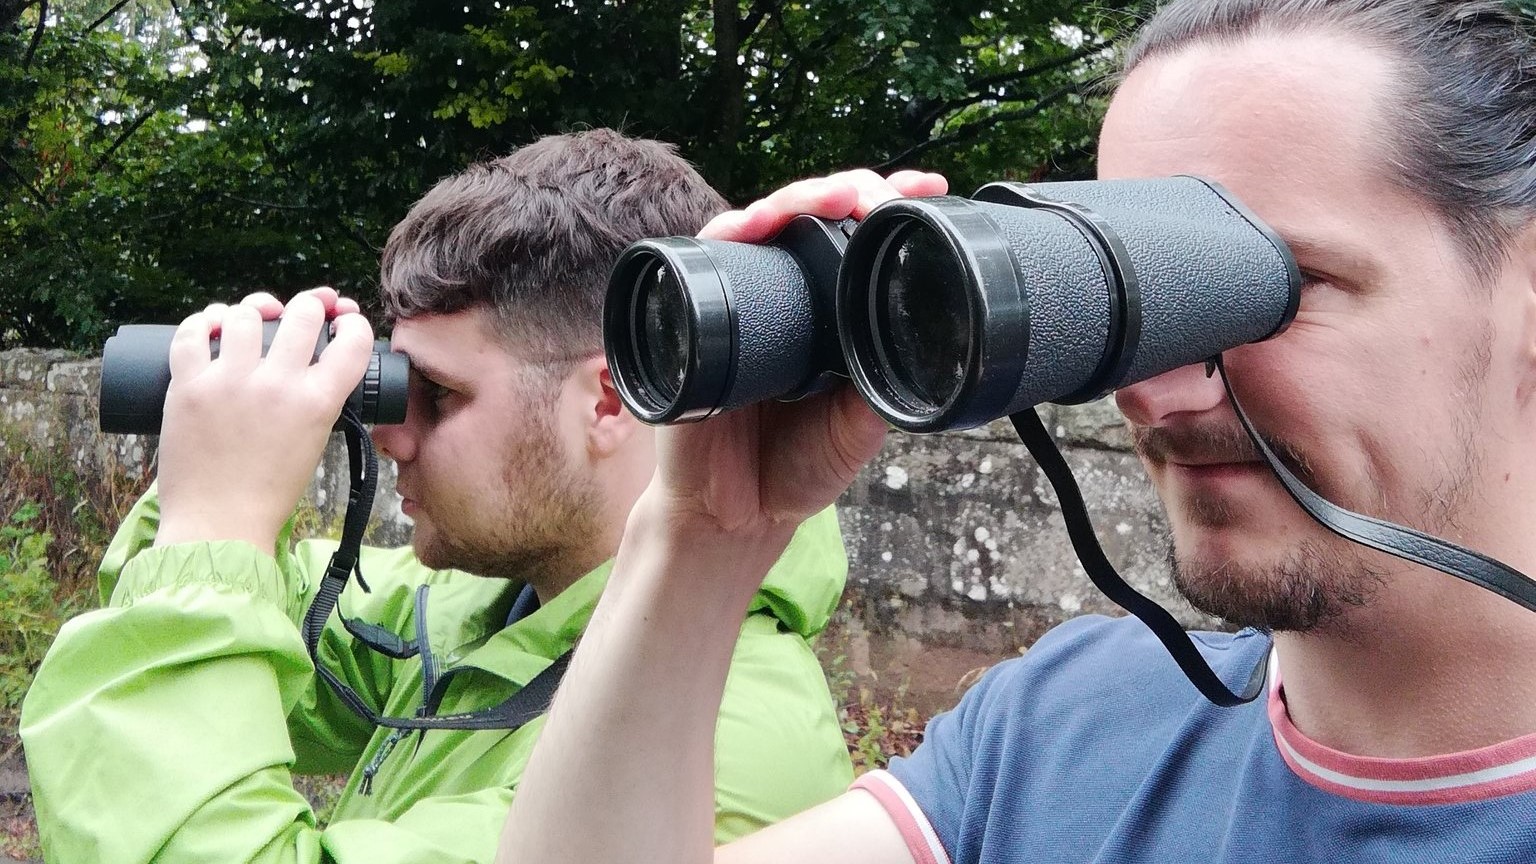 Project officers Mark and Owen surveying with binoculars